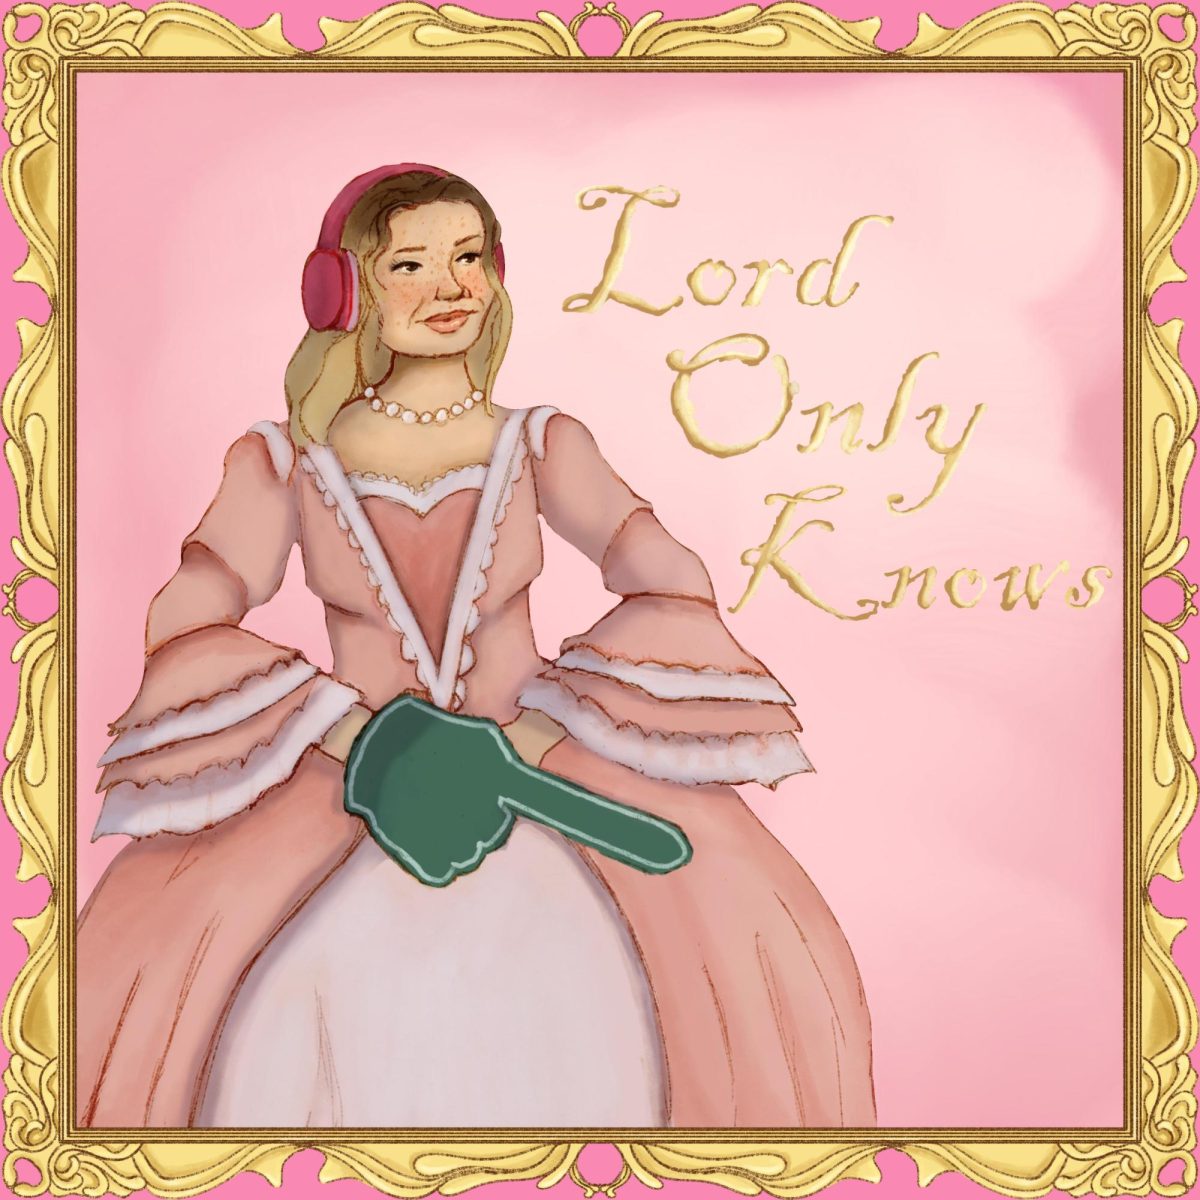 lord only knows4